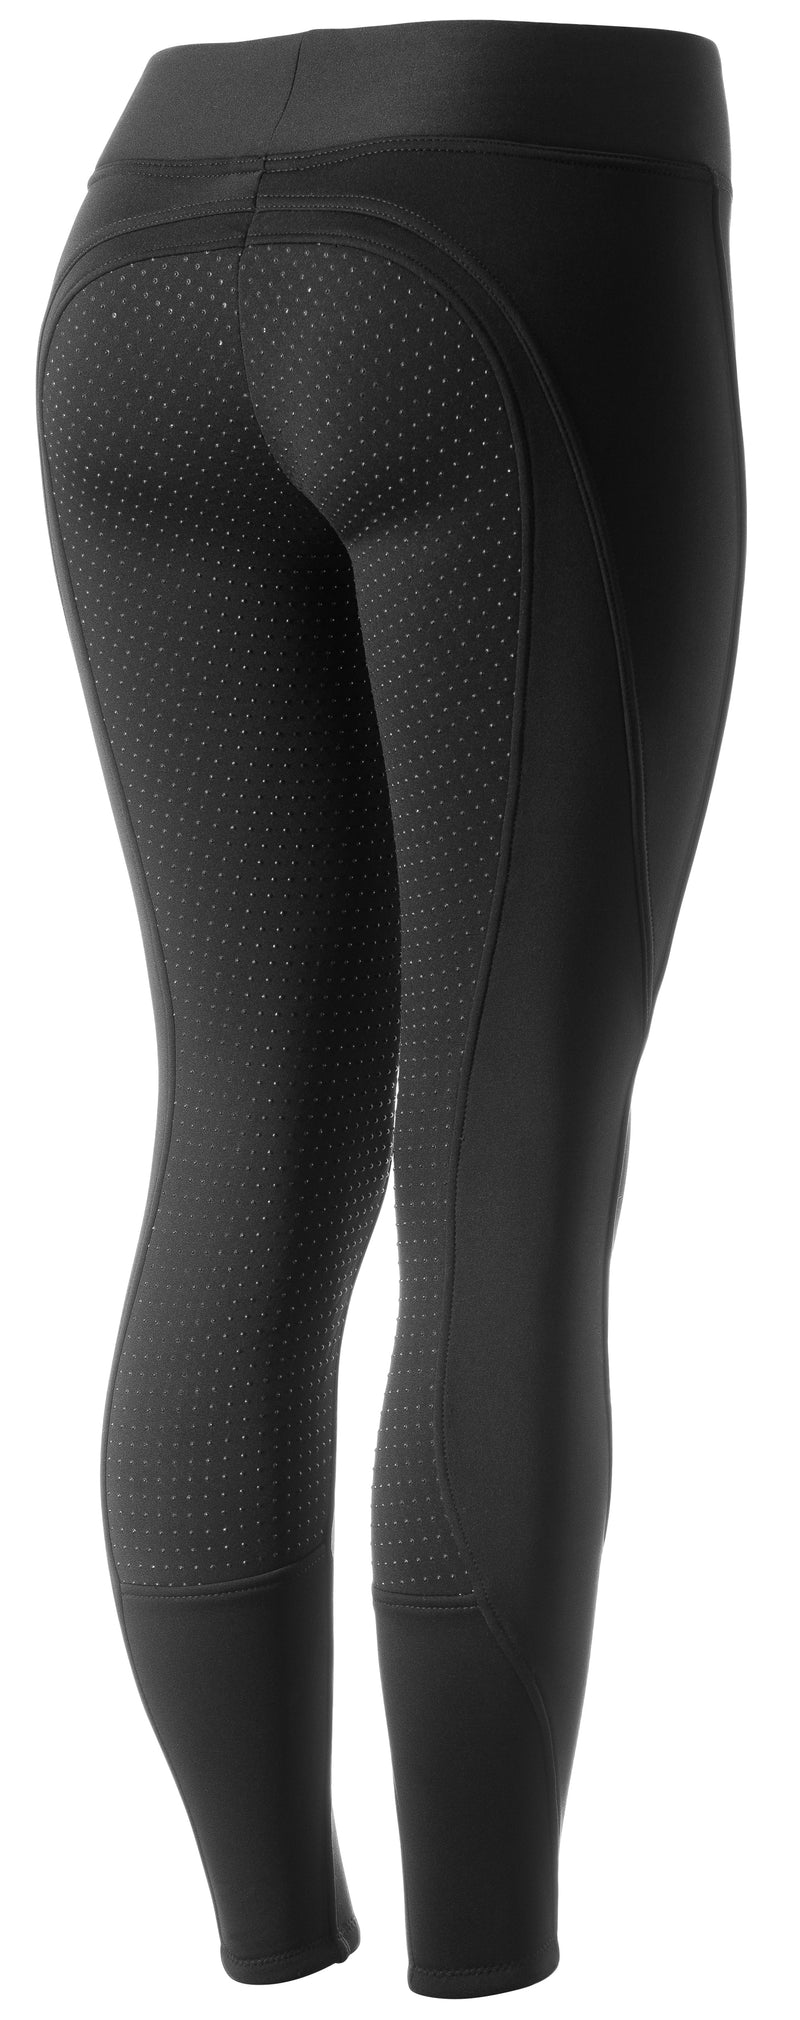 Black Horze Women's Active Winter Full Seat Tights - Silicone Grip Back